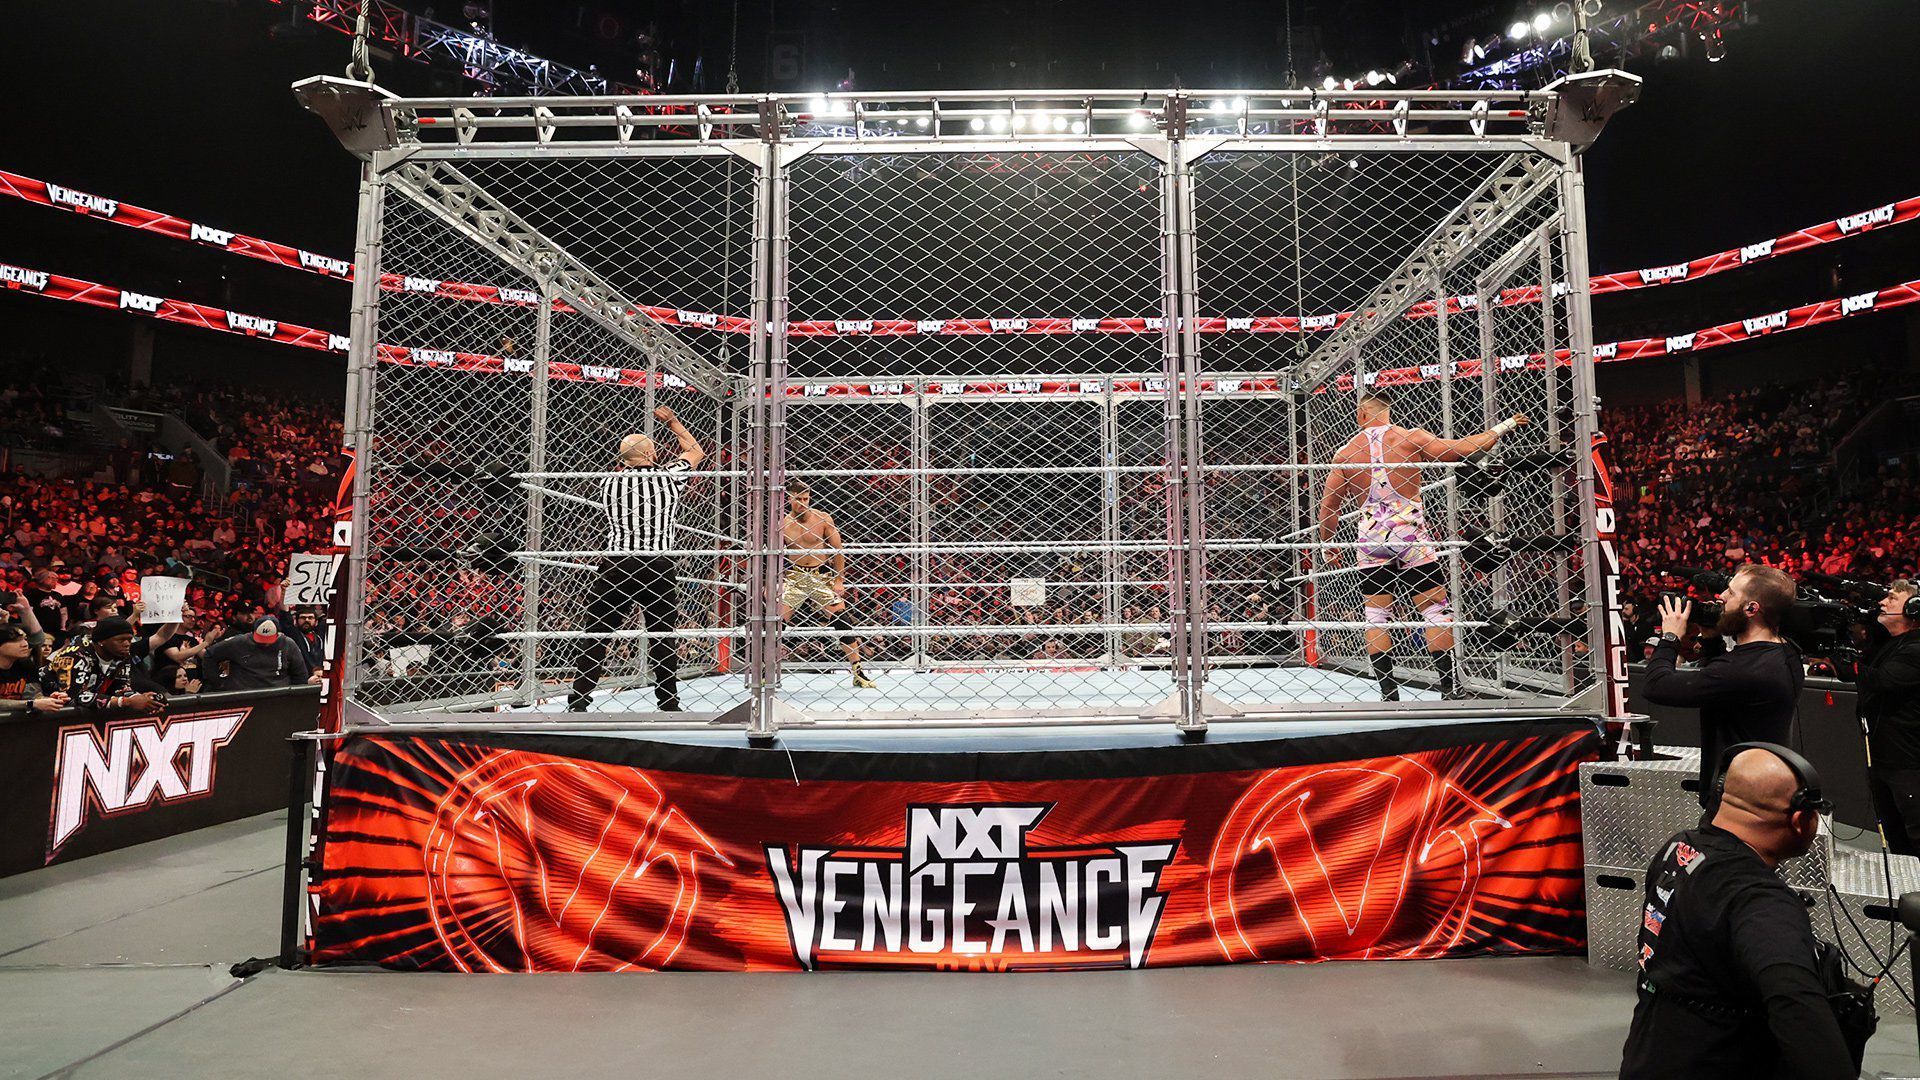 A steel cage took place at NXT Vengence.